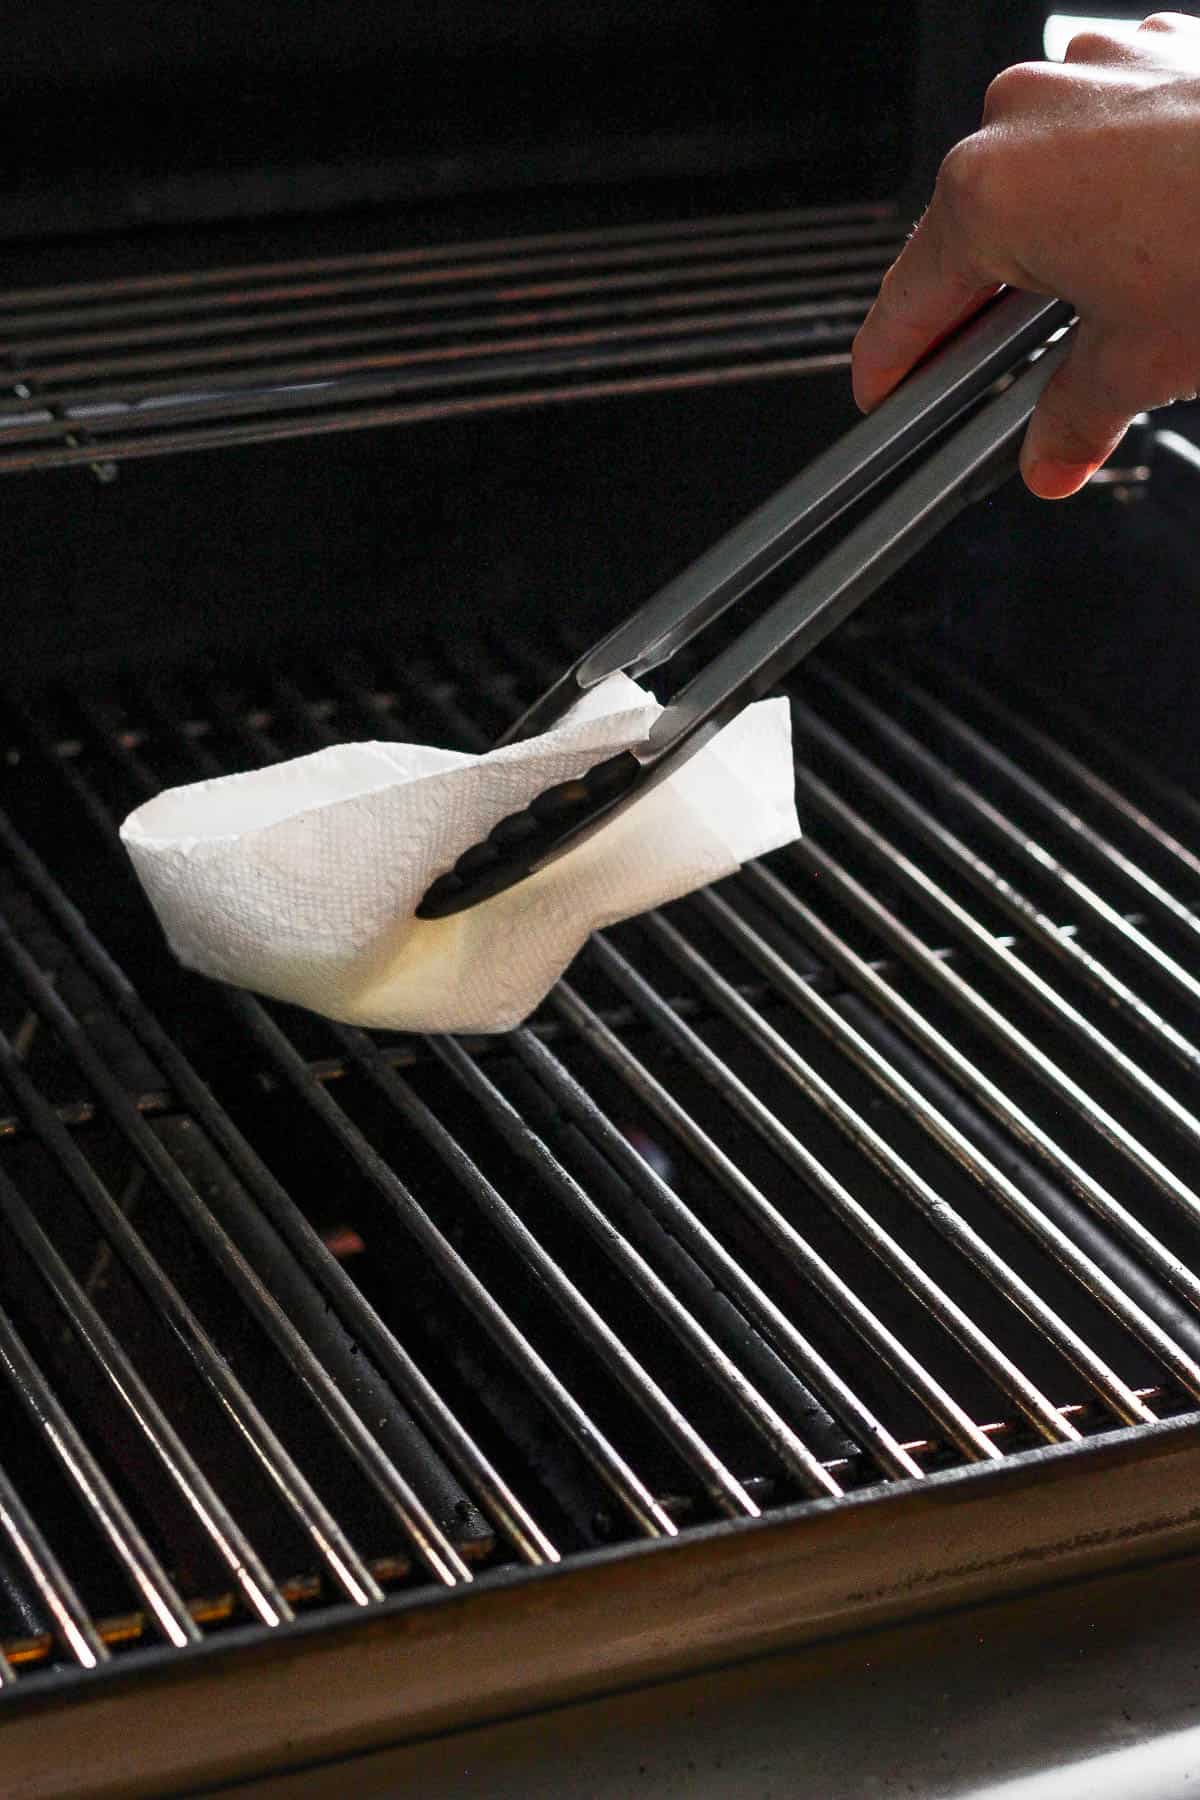 Grill grates being greased with an olive oil soaked paper towel and tongs.